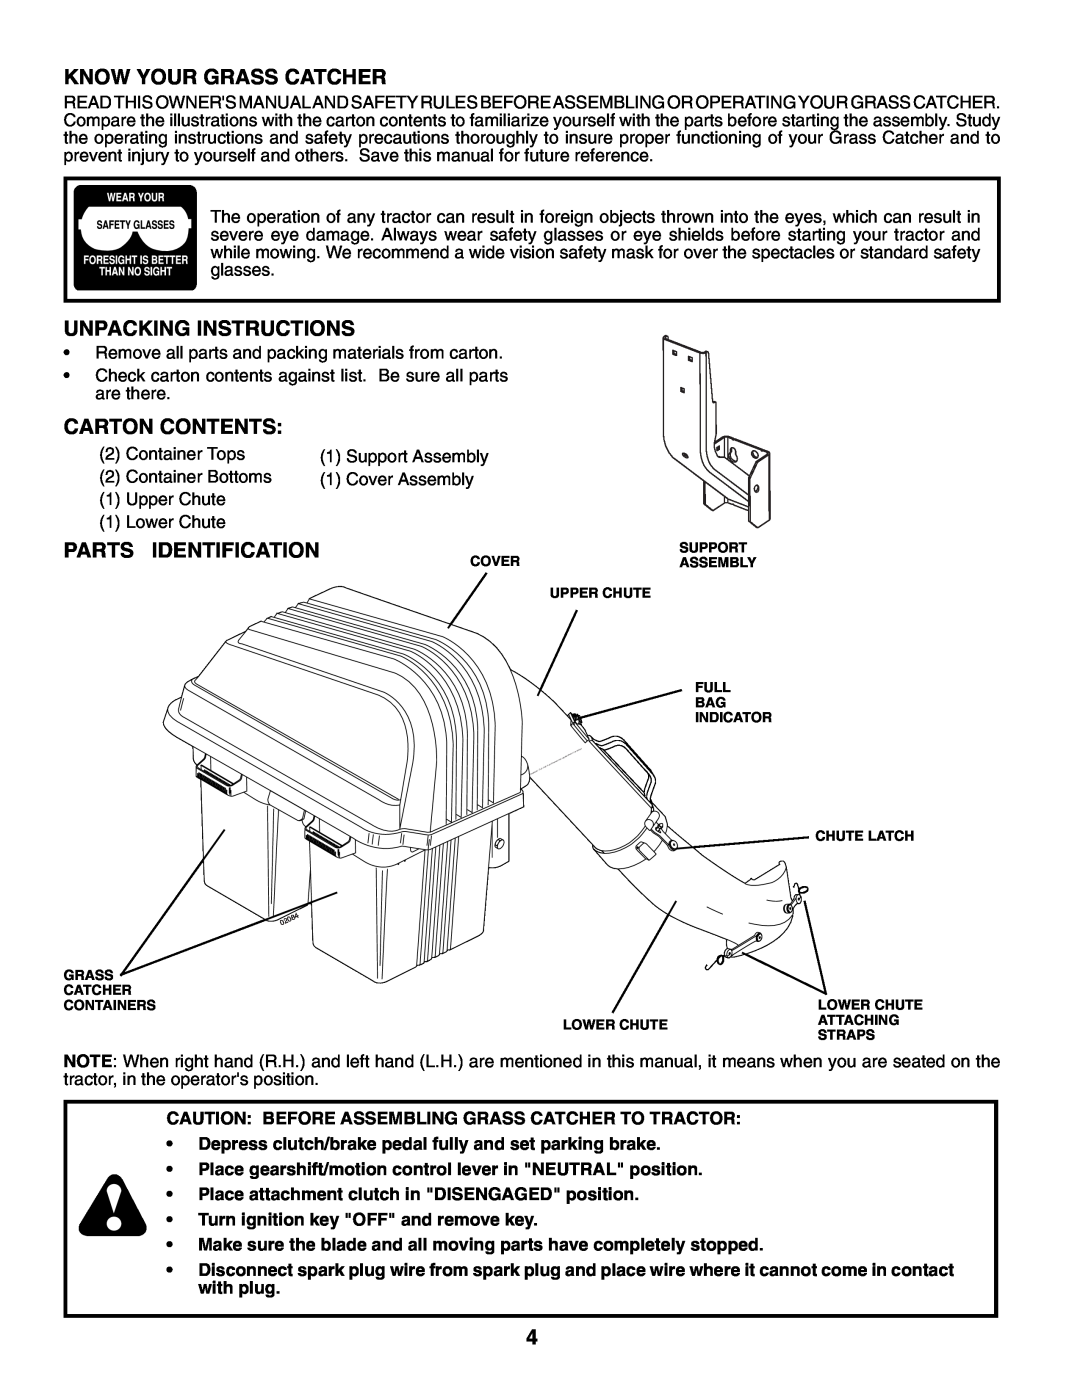 Poulan 960 72 00-13 owner manual Know Your Grass Catcher, Unpacking Instructions, Carton Contents, Parts Identification 